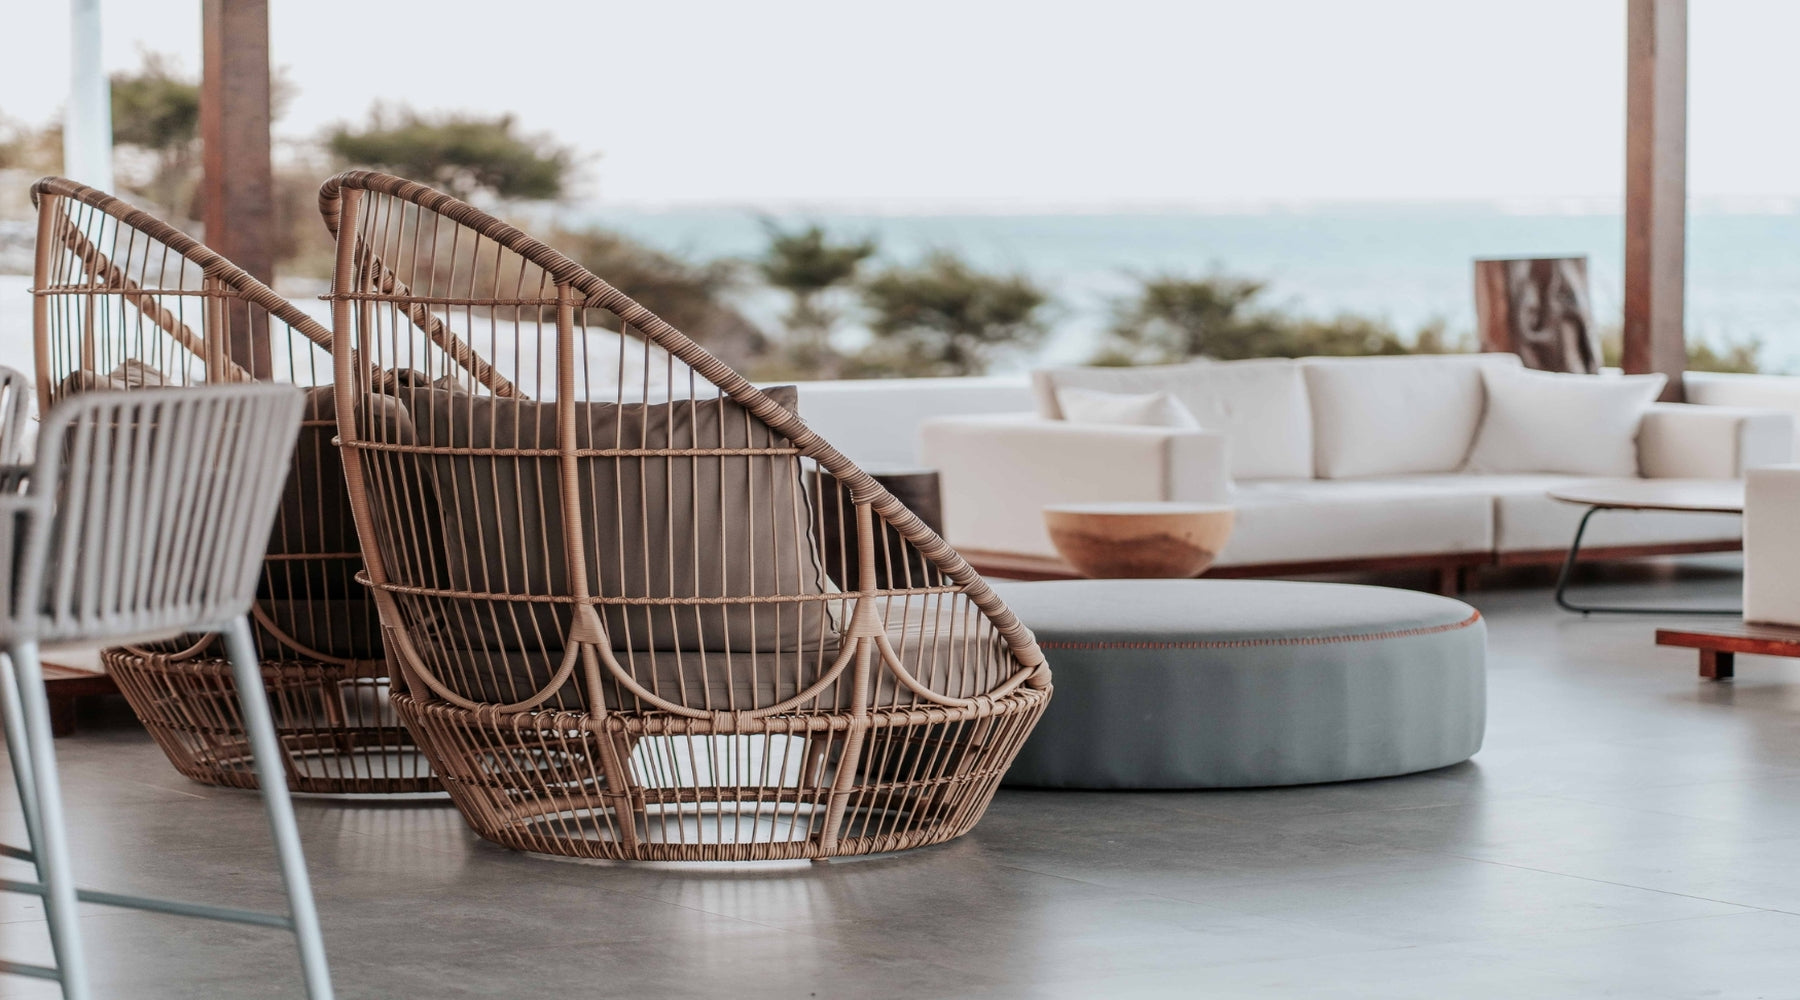 Elevate Your Outdoor Living - Home & Garden Furniture Collection: Outdoor Furniture Sets, Rattan Furniture, Sun Loungers, and More.